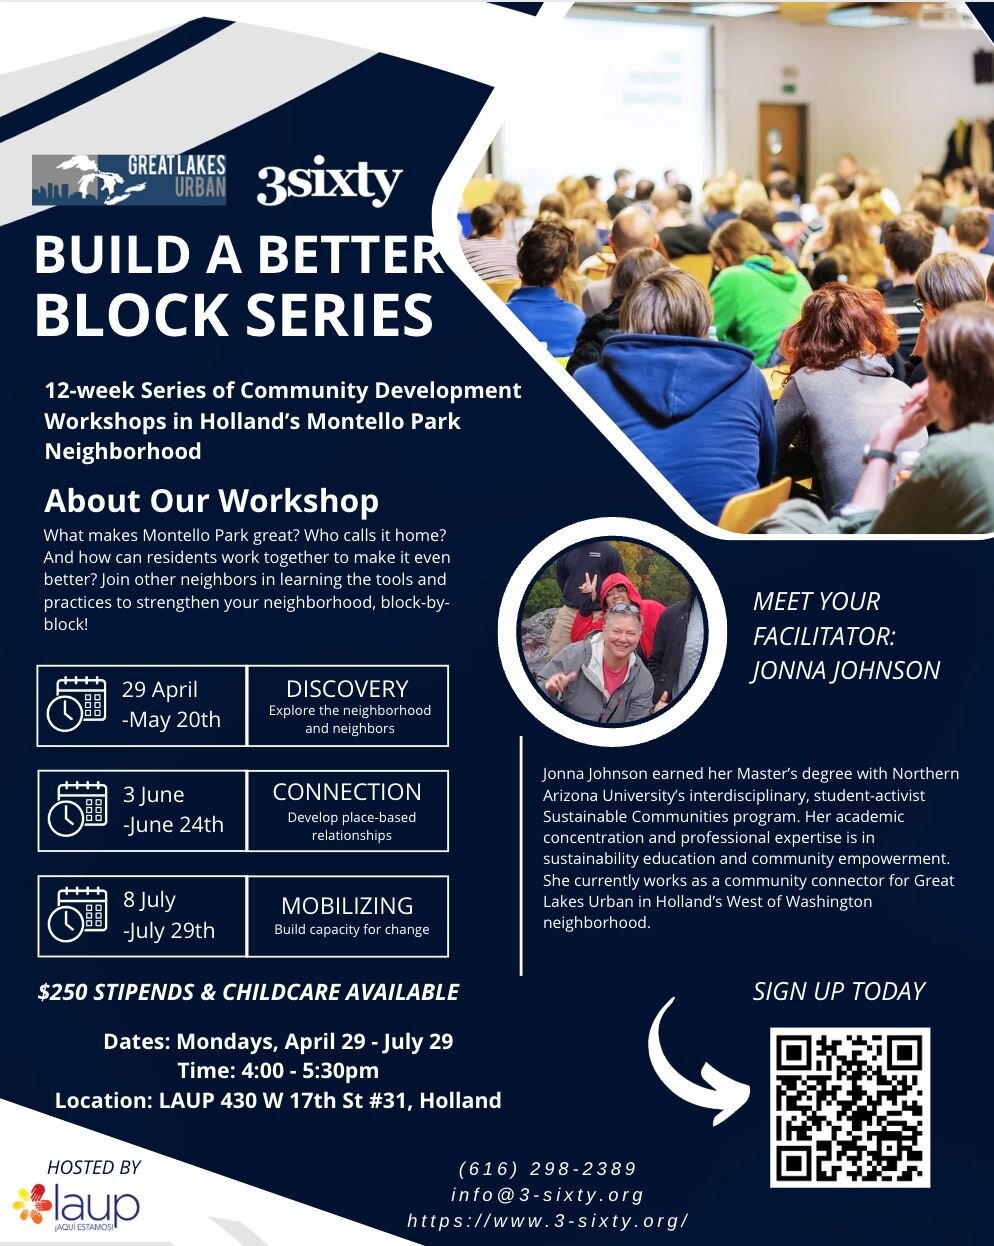 If you are a Montello Park resident or know of someone who is, we are hosting a workshop series where you can receive a $250 Stipend. 
.
Sixty and Great Lakes Urban will be hosting a series to help you become a better block leader, taught by Jonna Jo